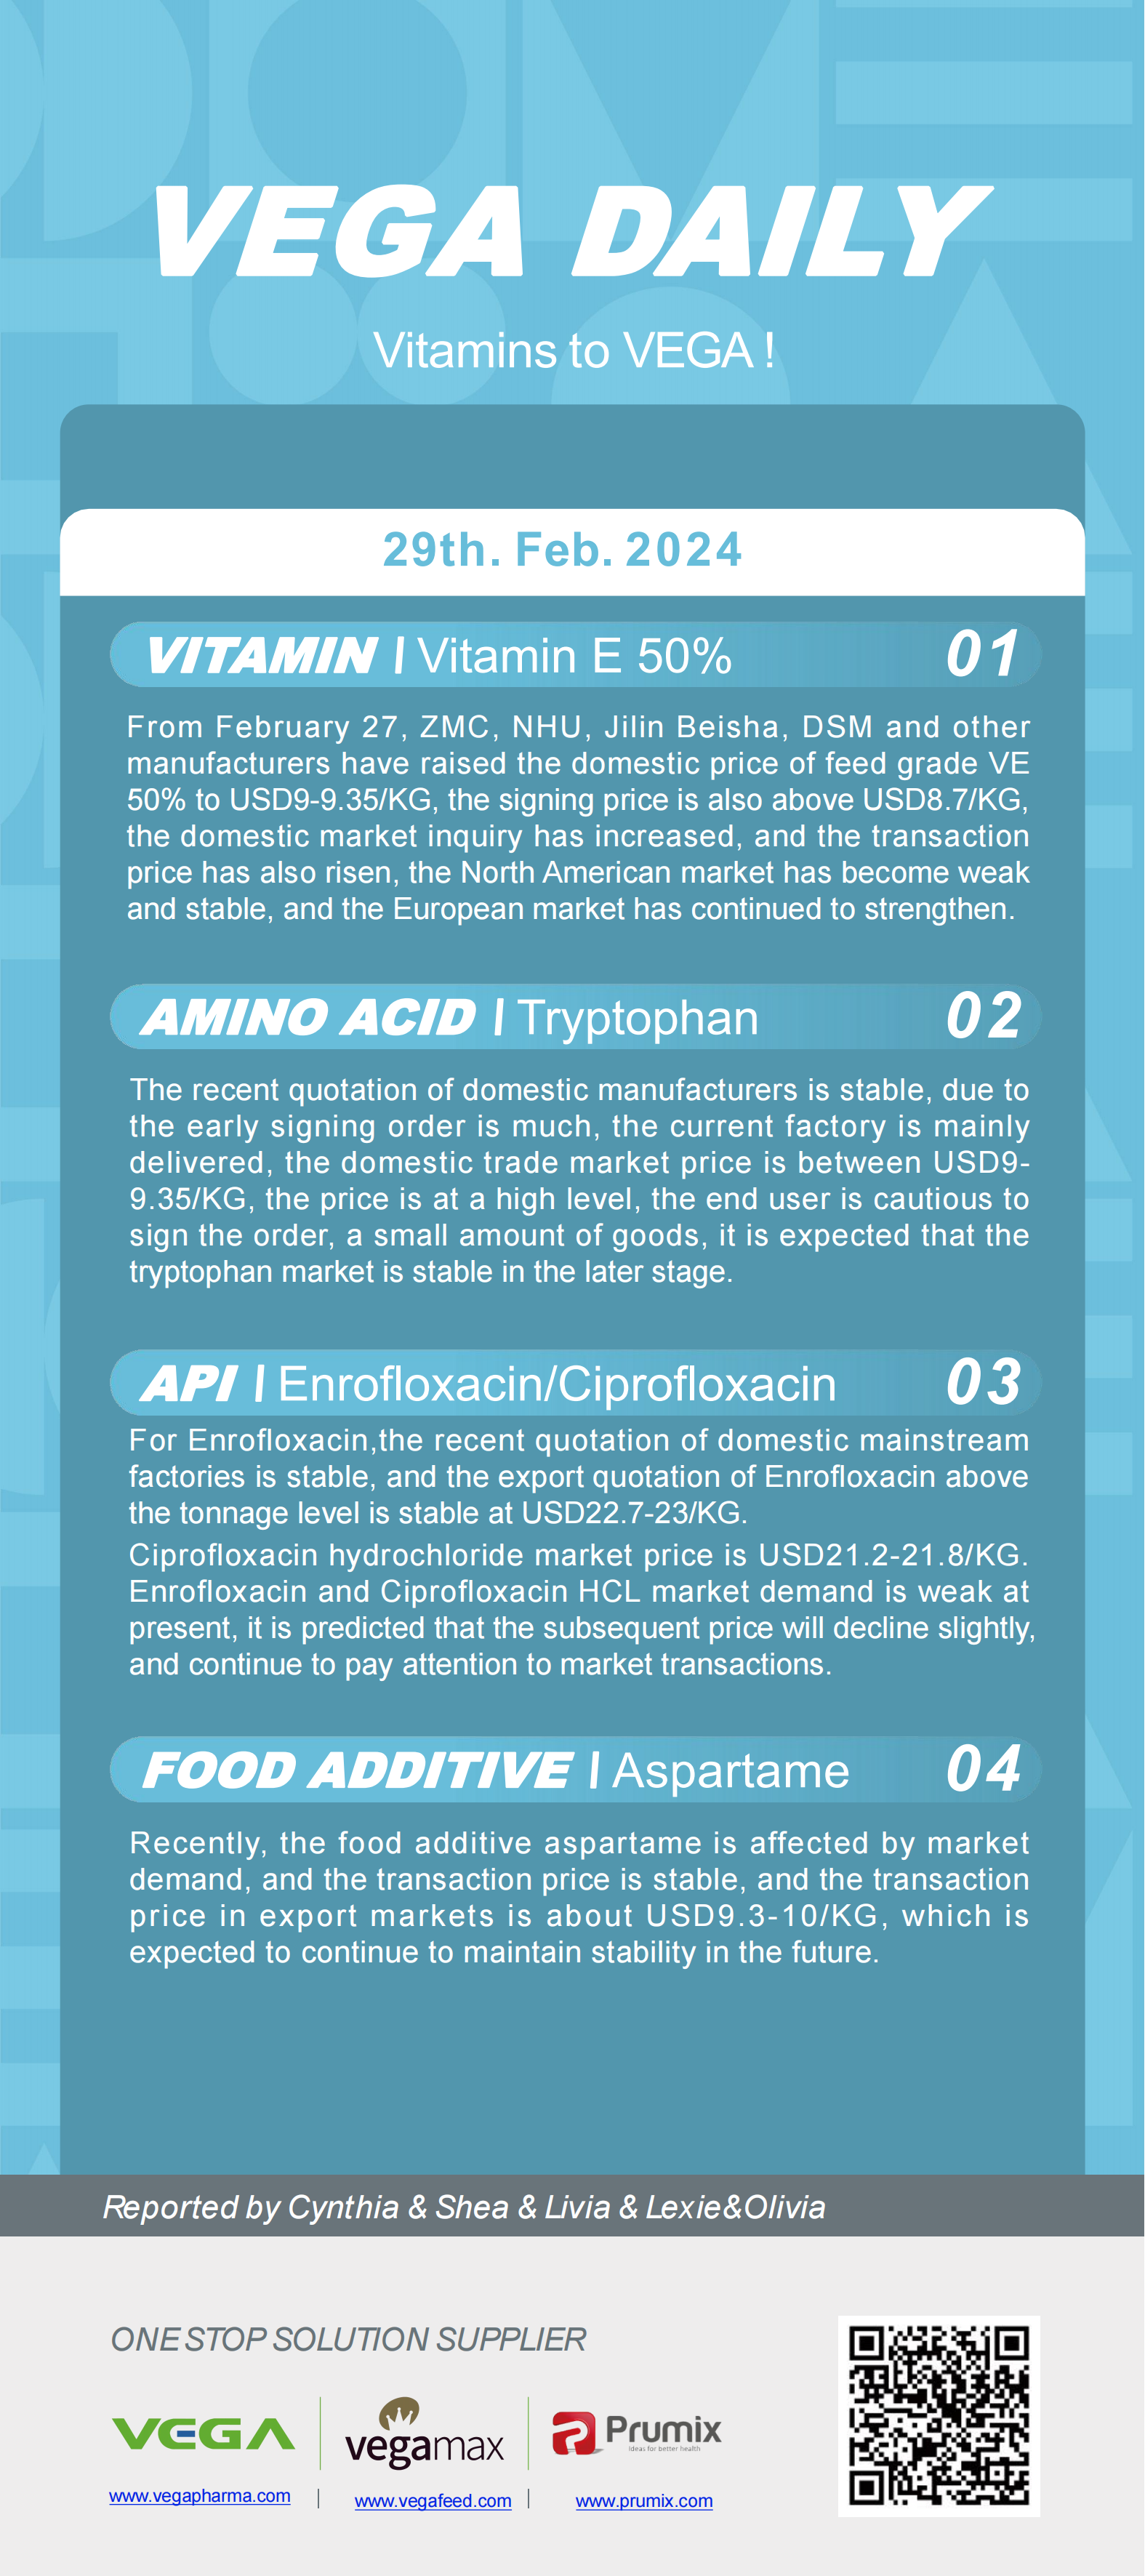 Vega Daily Dated on Fab 29th 2024 Vitamin Amino Acid APl Food Additives.png